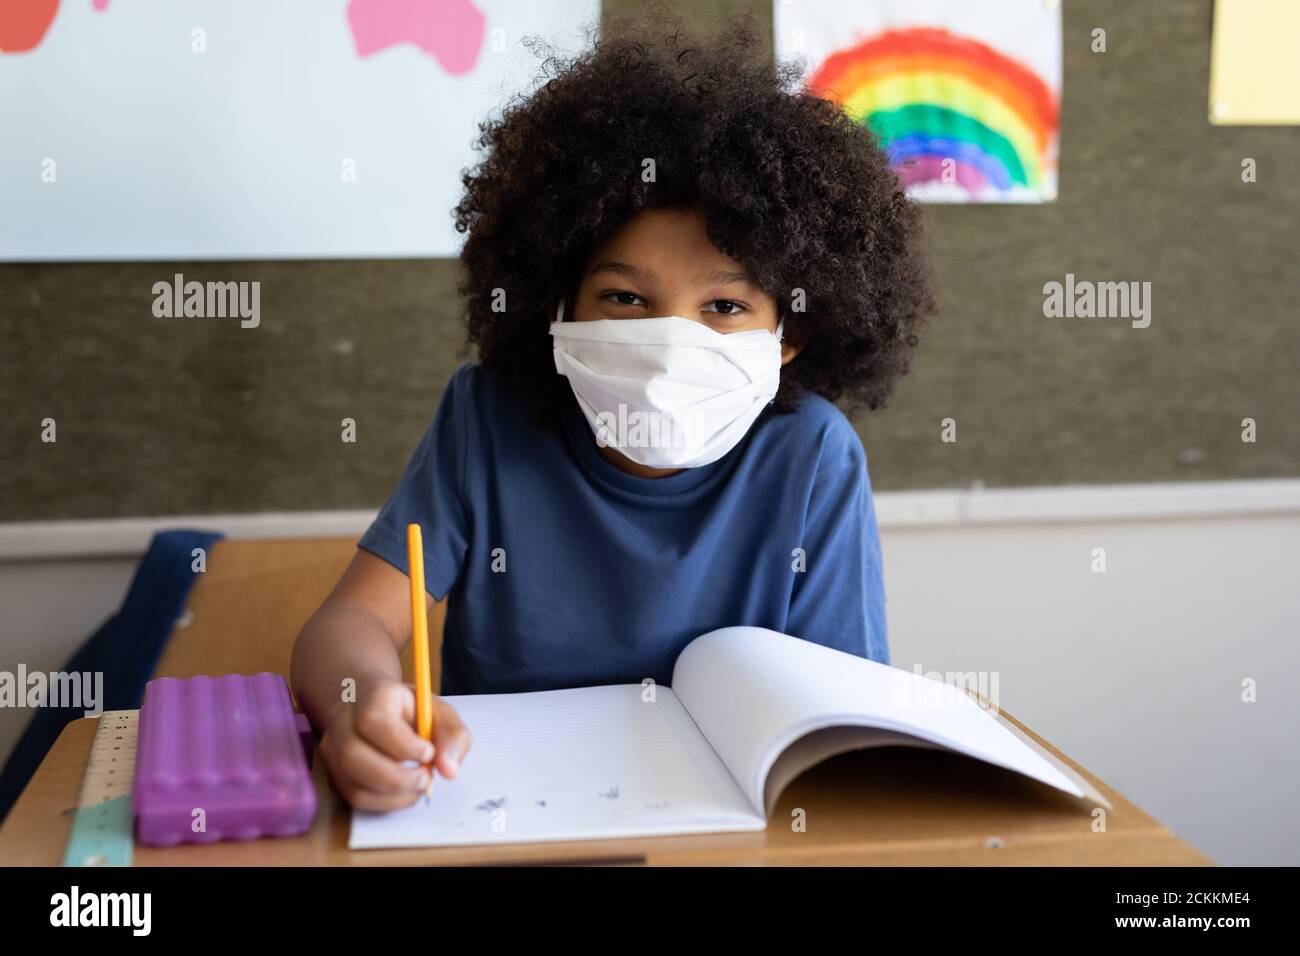 Portrait of boy wearing face mask writing while sitting on his desk at school Stock Photo